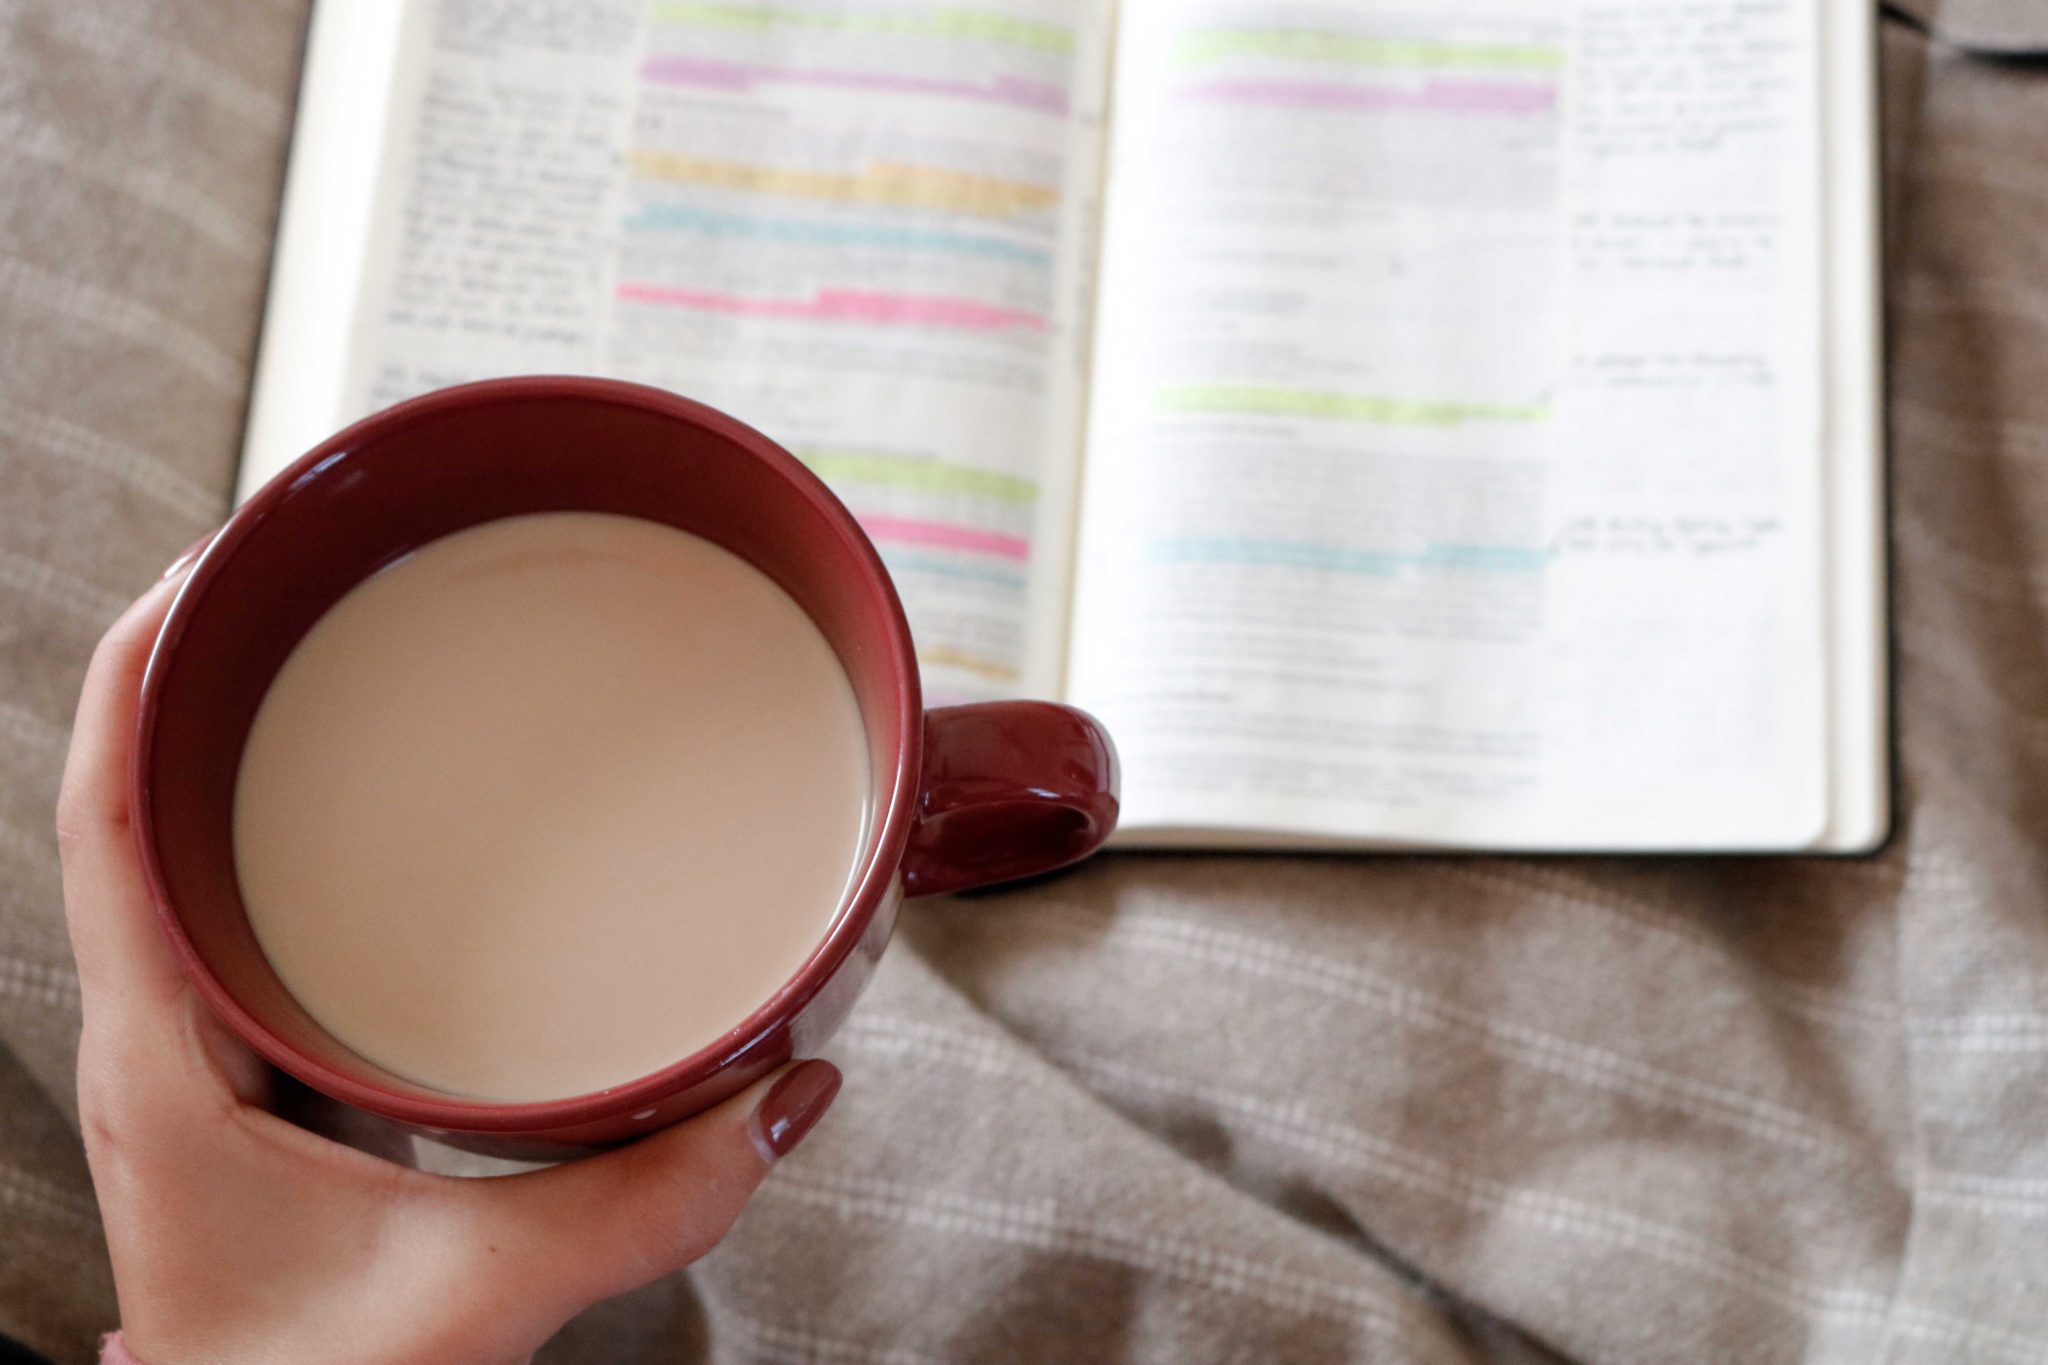 Woman's hand holding coffee while studying her bible